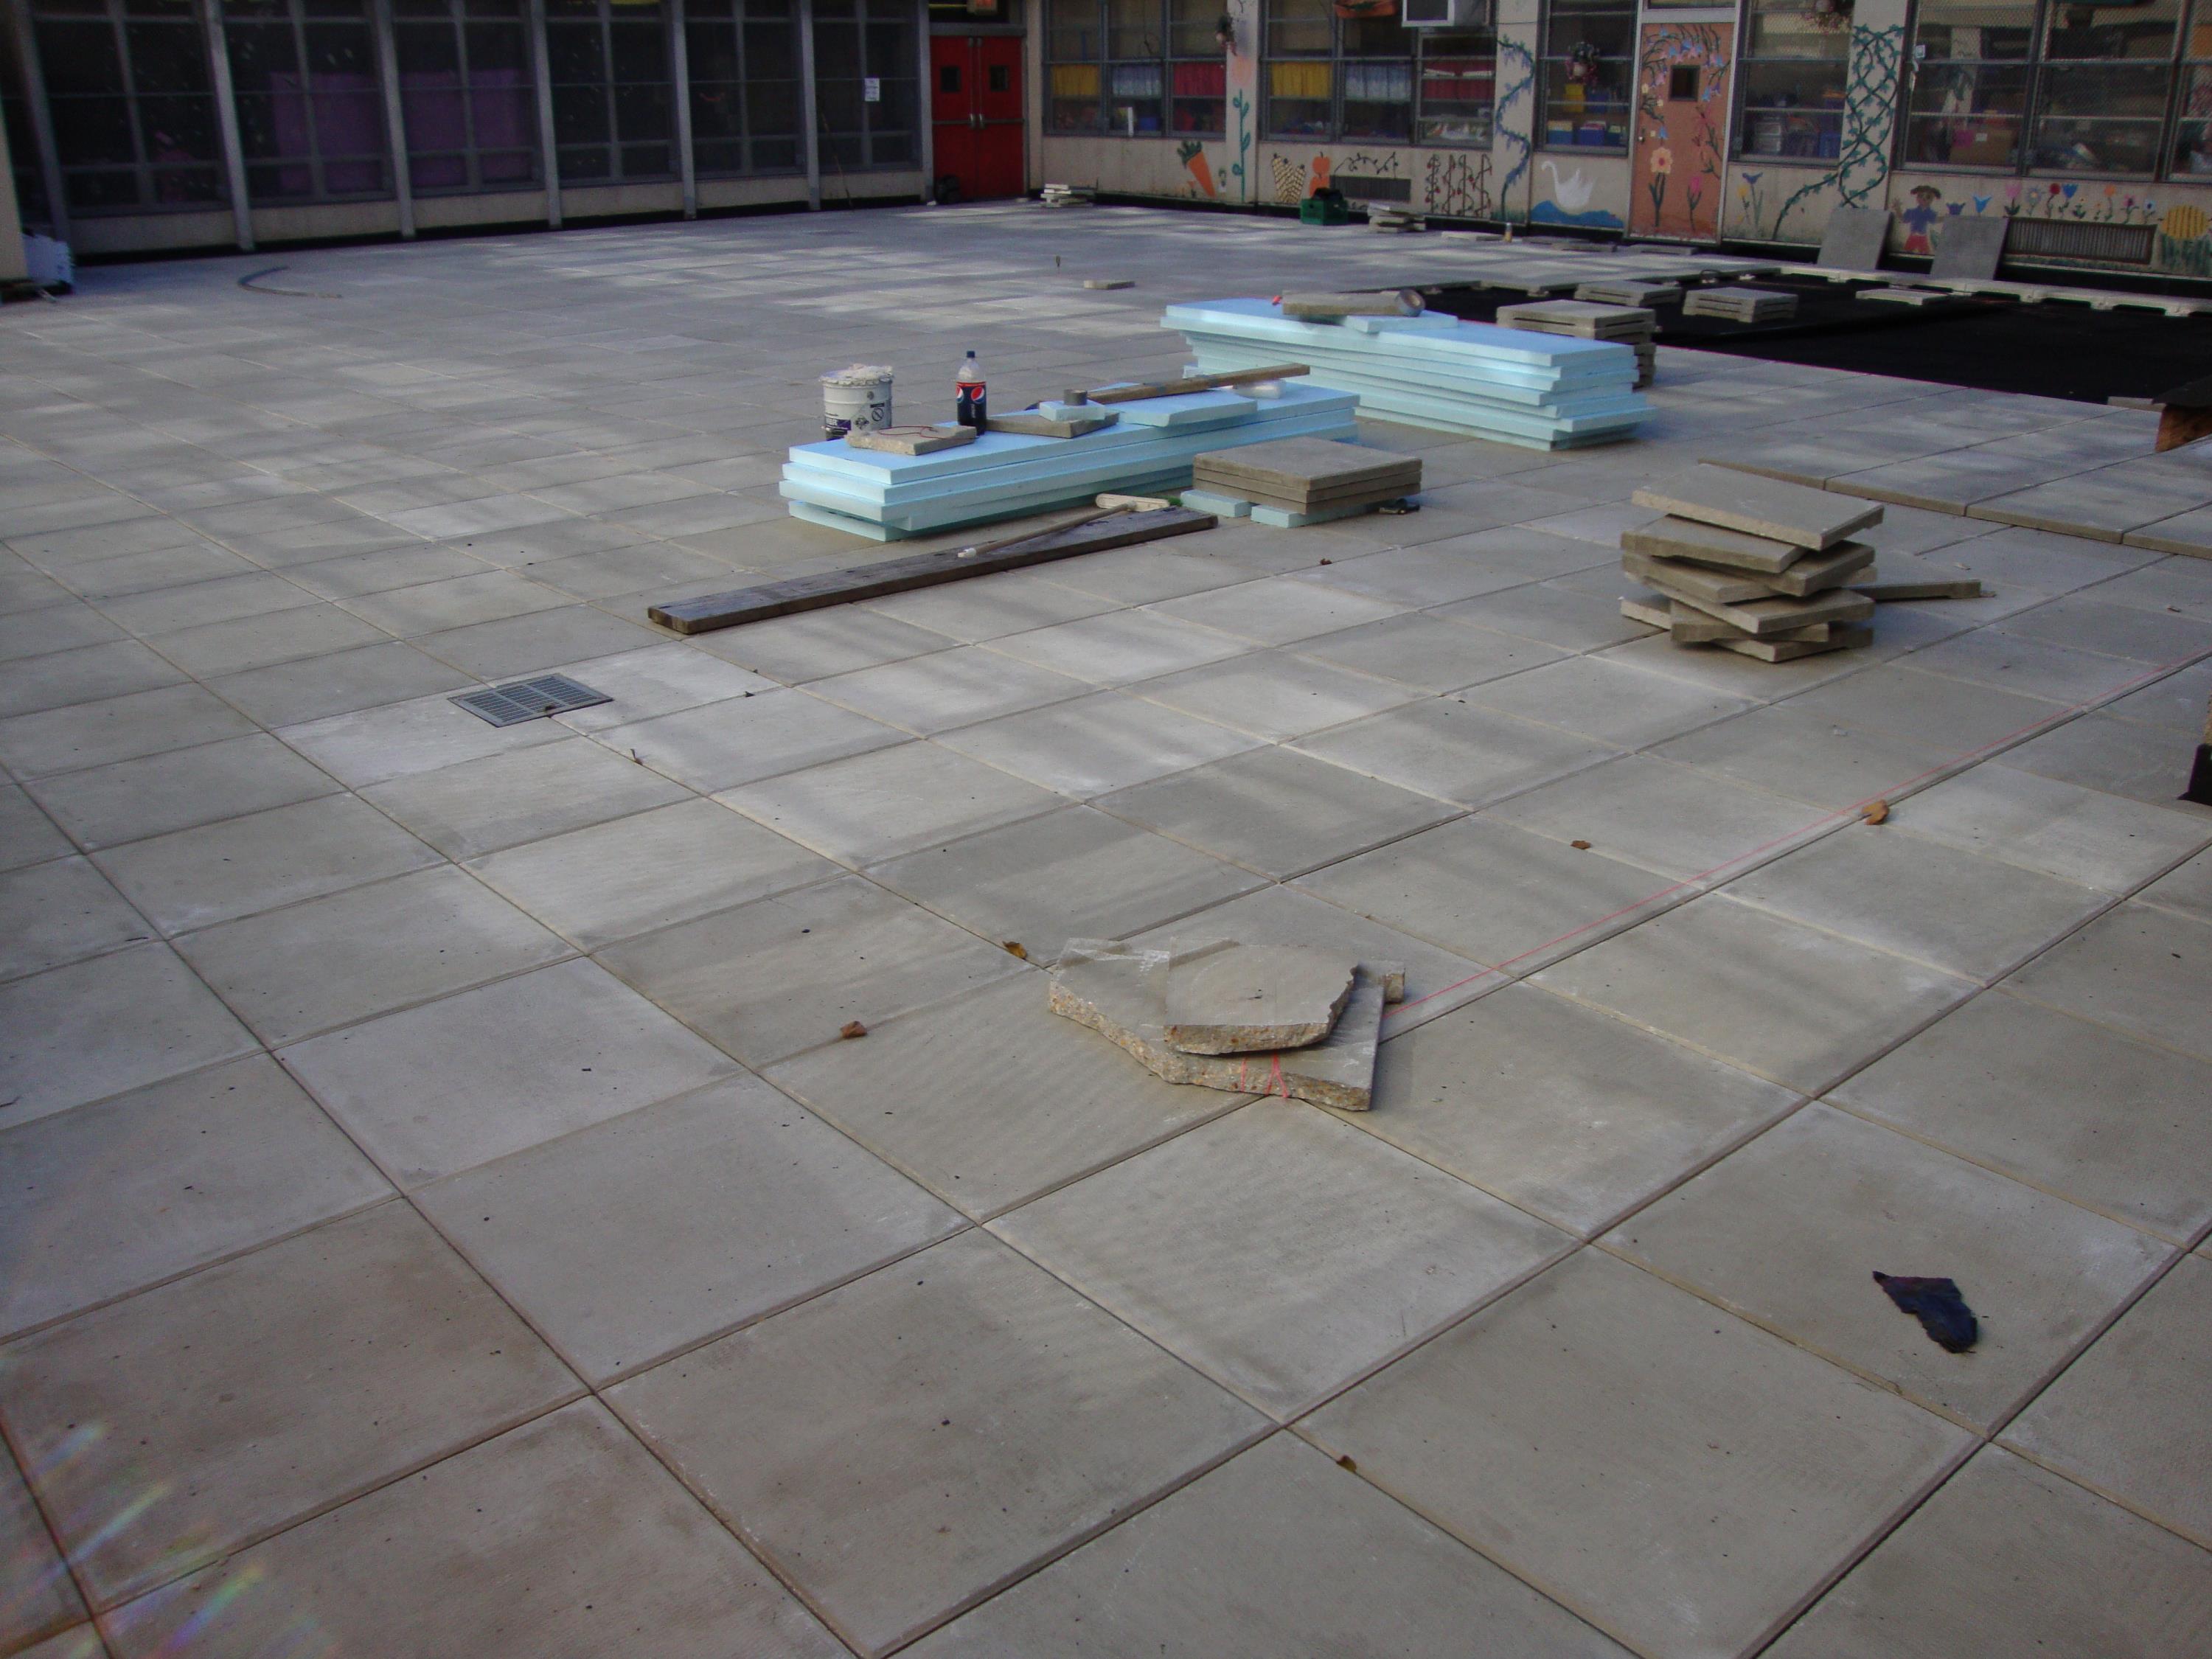 Public School Recreational Rooftop Playground Area Over Concrete Pavers a